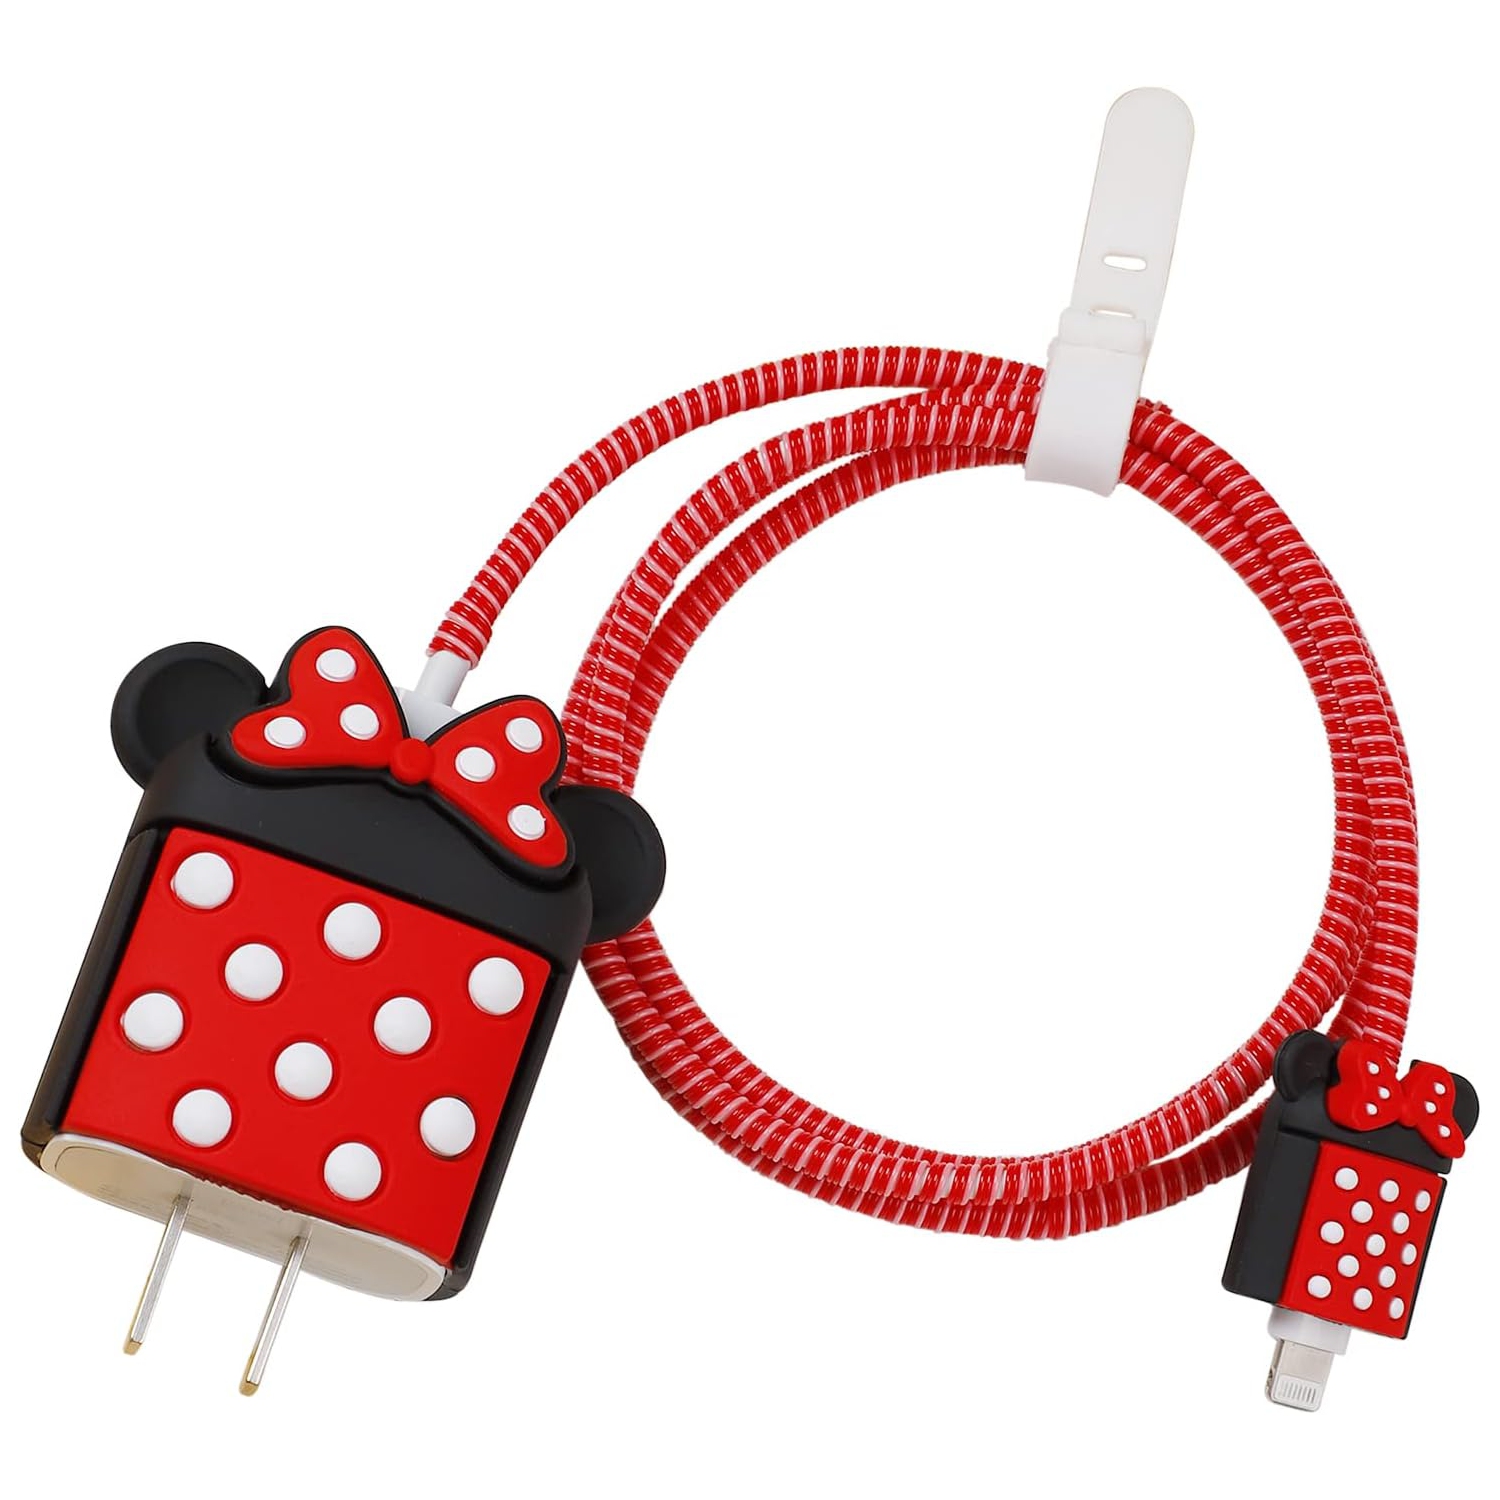 3D Cute Cartoon Charger Protector Case - Compatible for Apple 20W USB-C Power Adapter and Lightning Cable (Red Mouse)